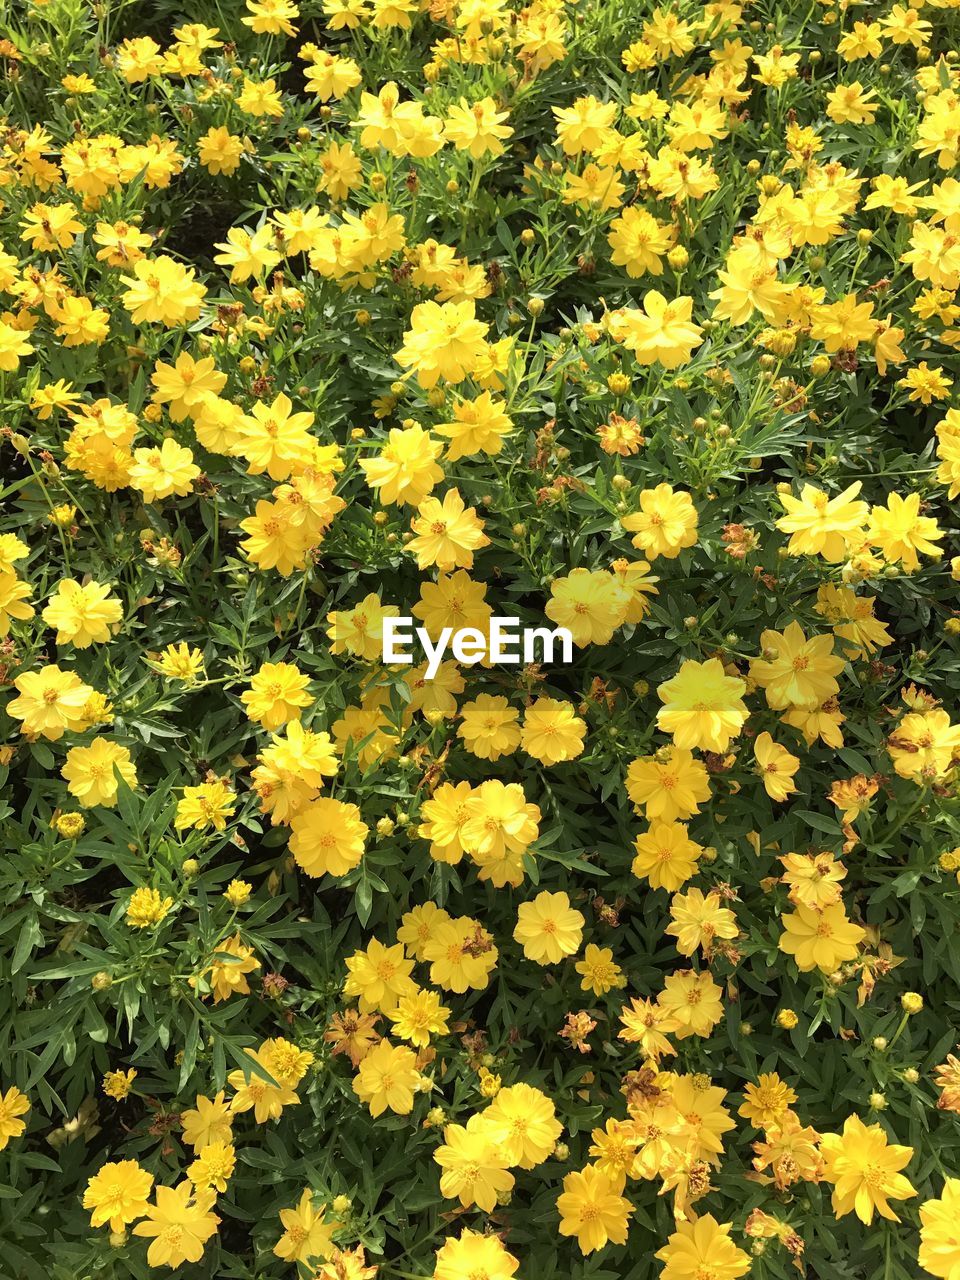 HIGH ANGLE VIEW OF YELLOW FLOWERS BLOOMING IN FIELD